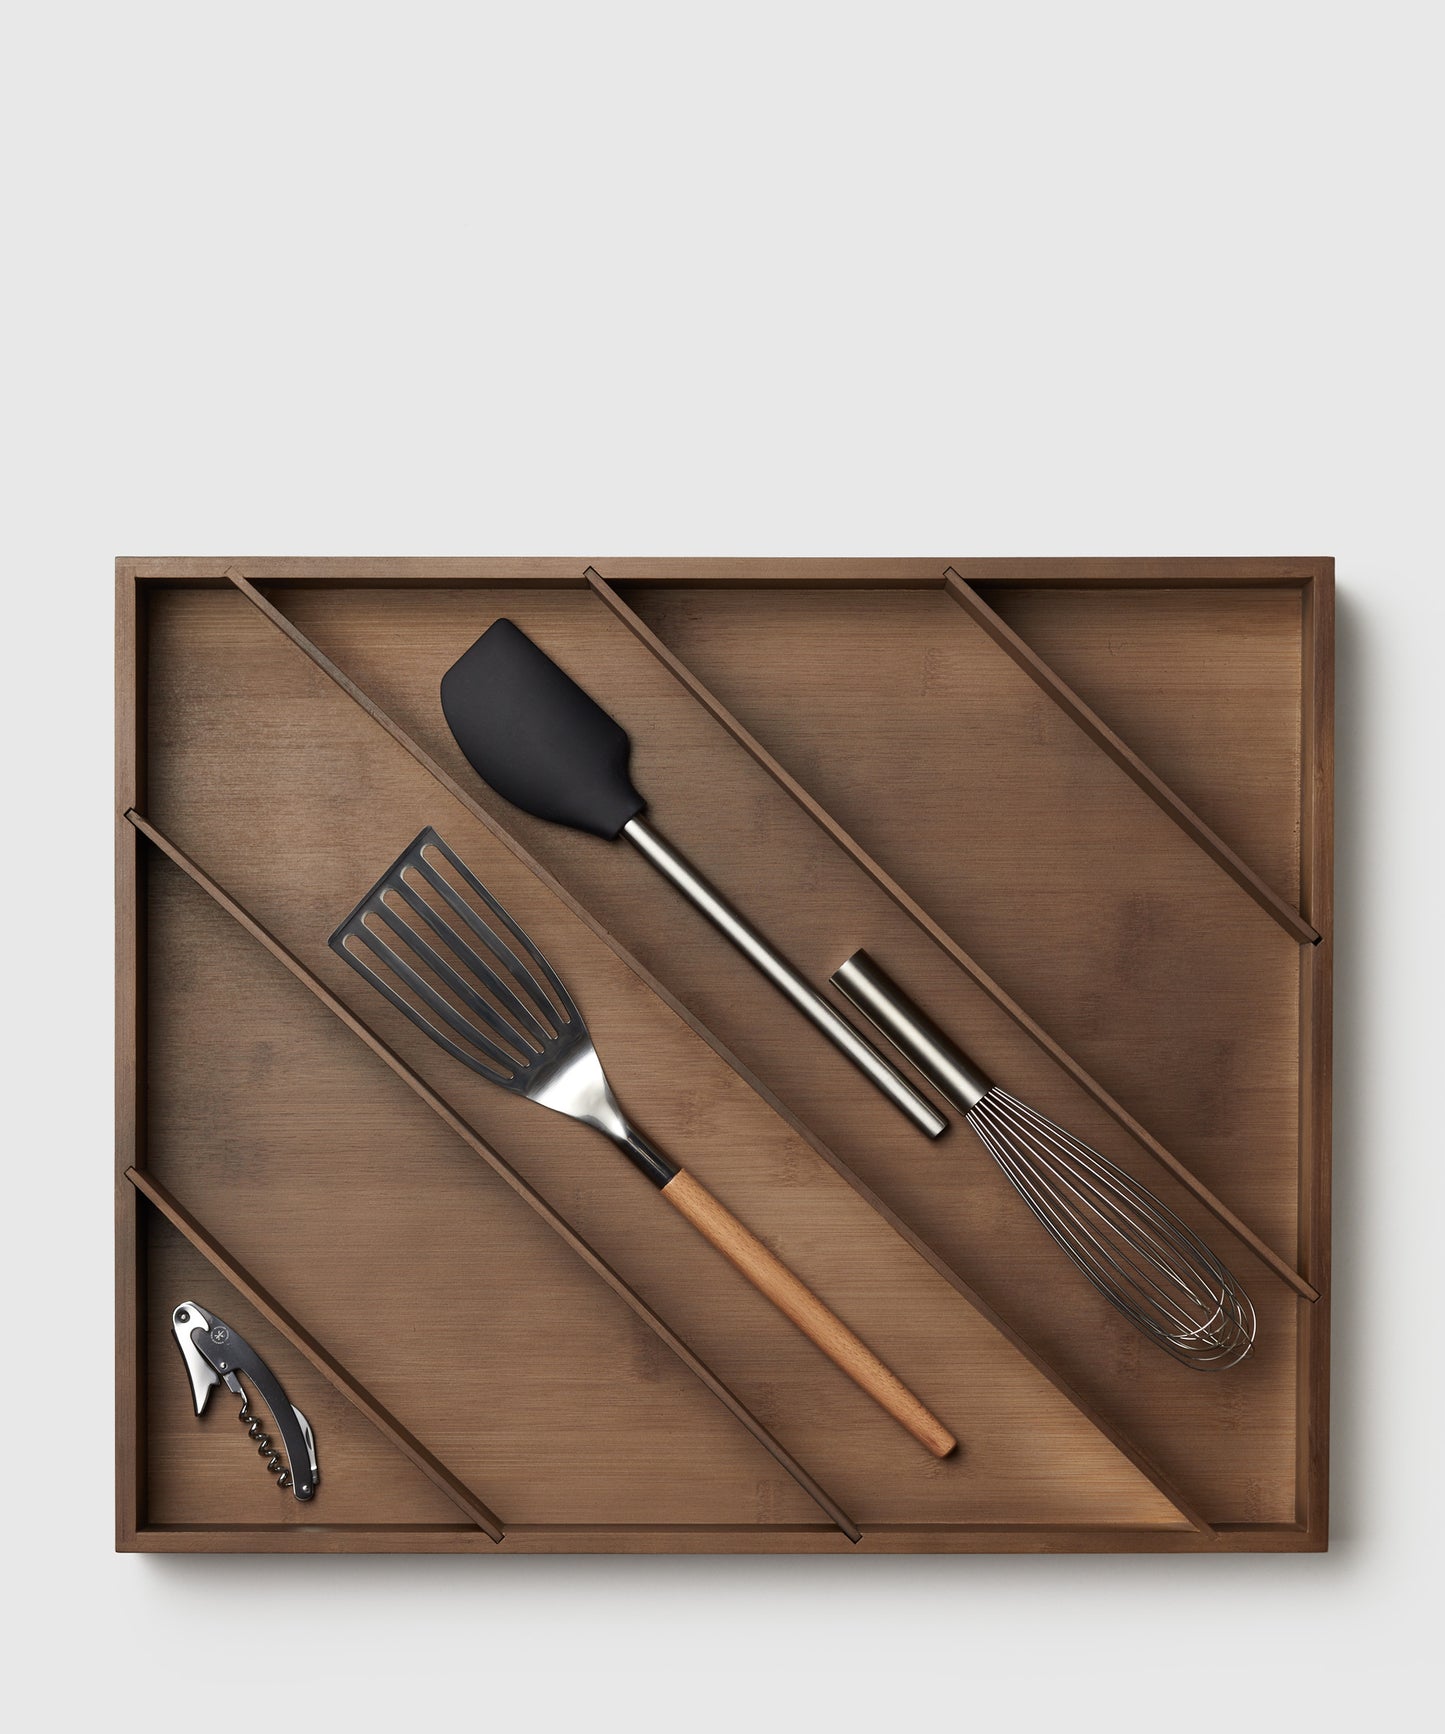 Bamboo Utensil Organizer With Diagonal Compartments by Marie Kondo